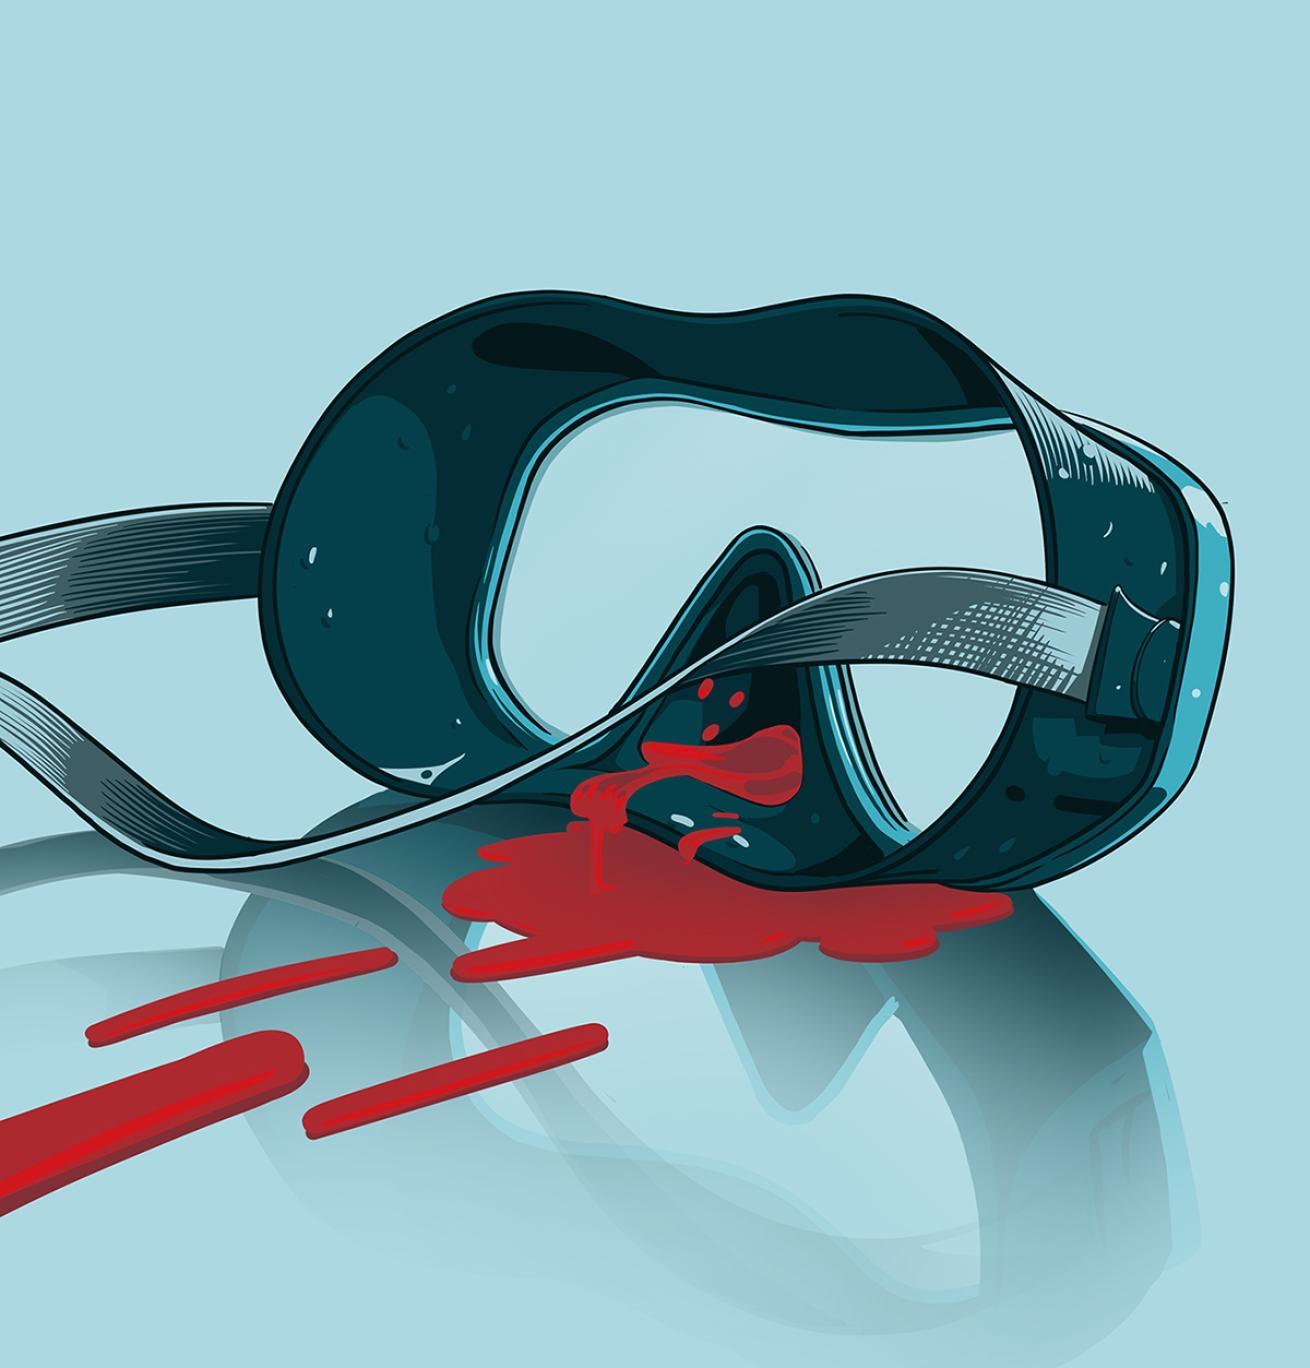 Illustration of blood filling the nose of a scuba diving mask.